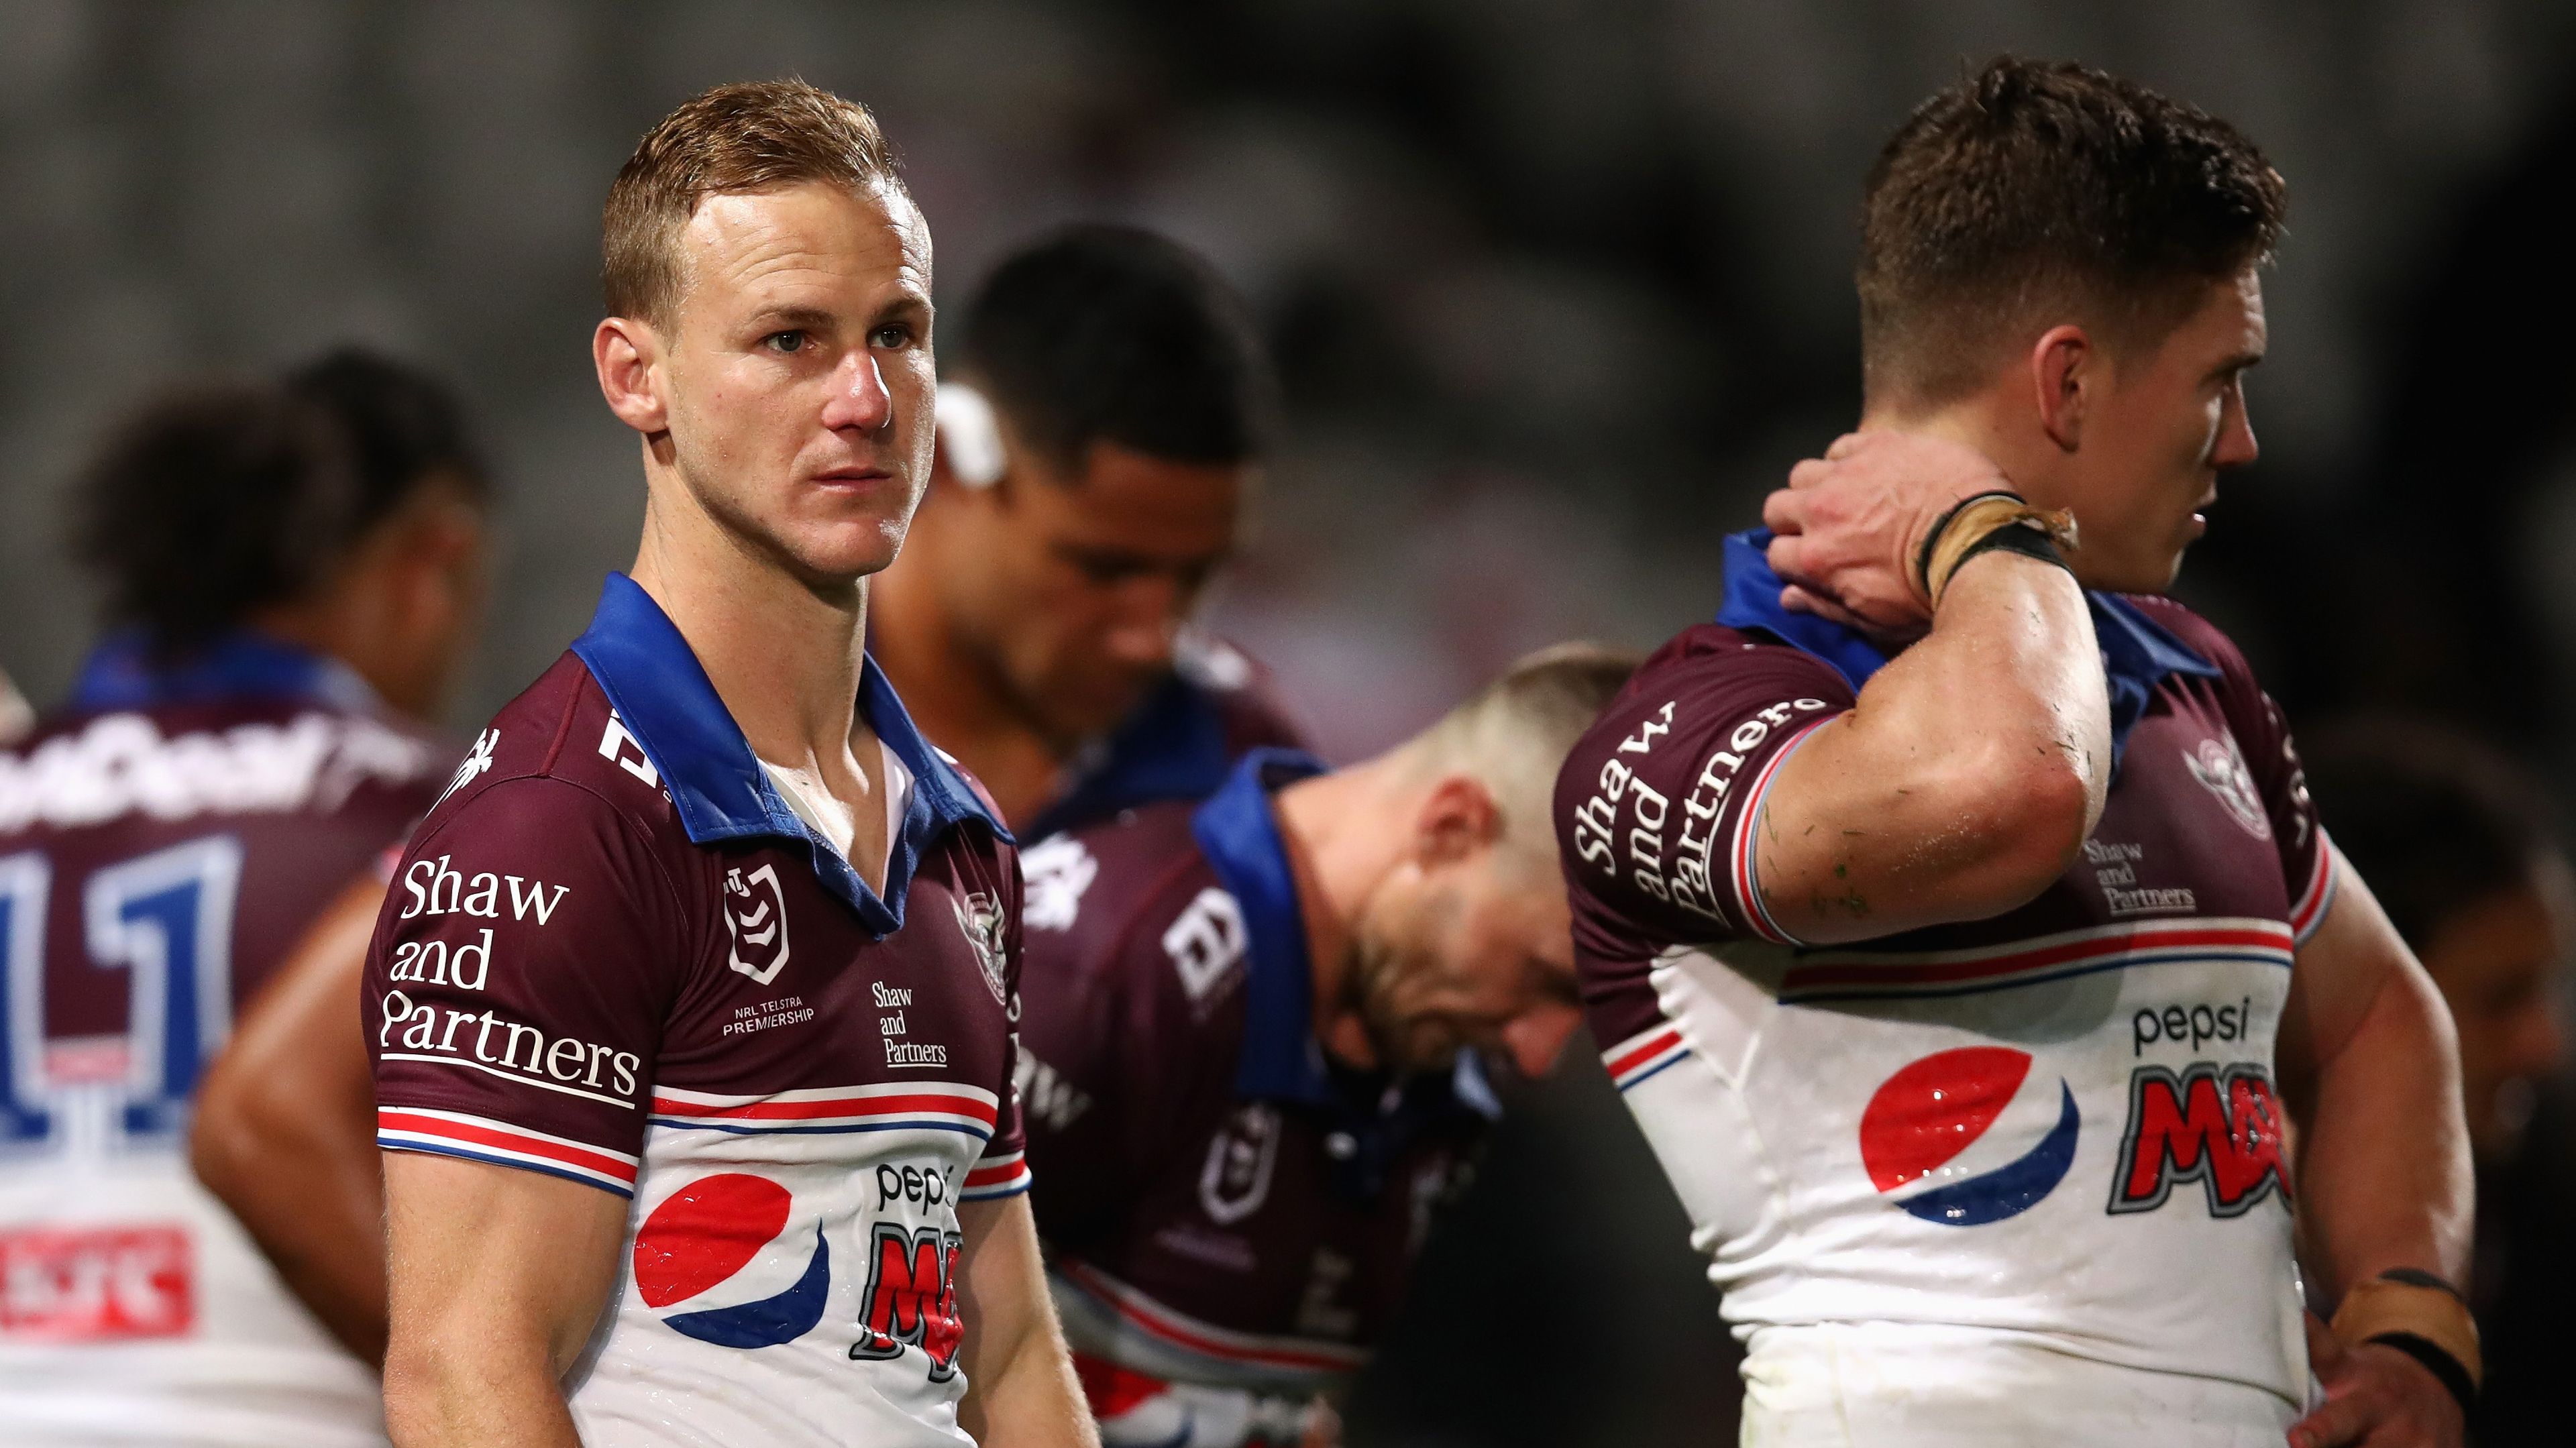 Daly Cherry-Evans of the Sea Eagles looks dejected during the round 19 NRL match between the St George Illawarra Dragons and the Manly Warringah Sea Eagles at Netstrata Jubilee Stadium, on July 22, 2022, in Sydney, Australia. (Photo by Jason McCawley/Getty Images)